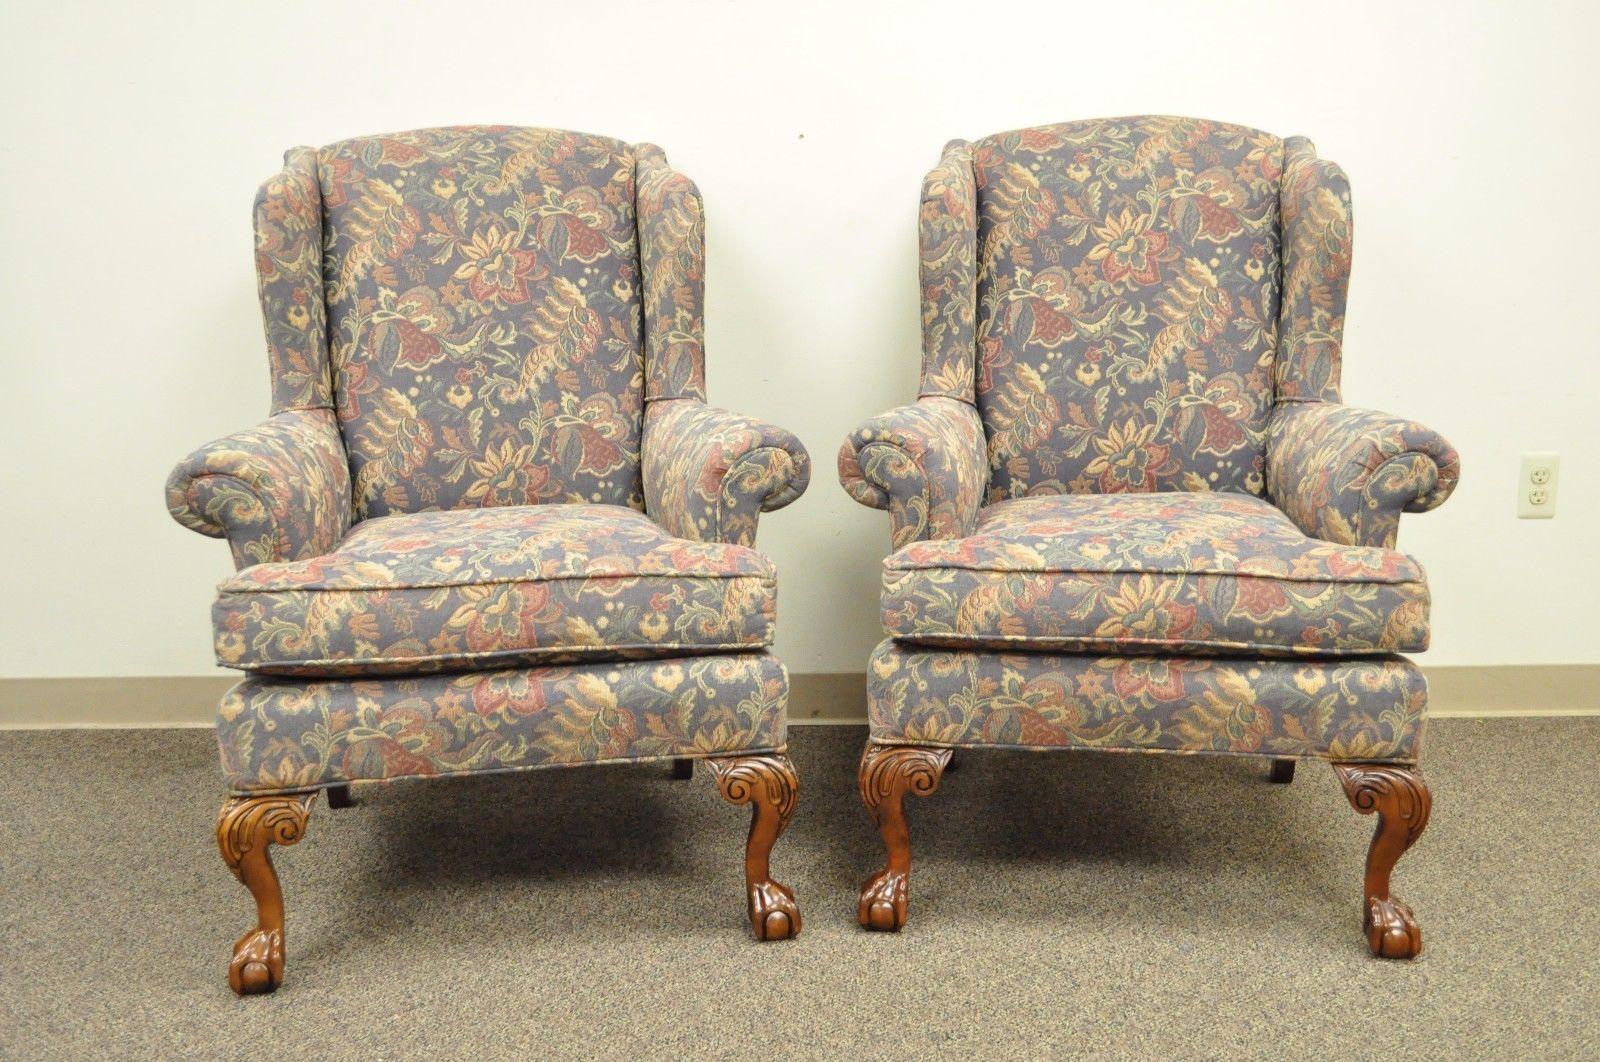 Pair of vintage American made high quality Chippendale style solid mahogany ball and claw wingback chairs by American of high point, circa late 20th century, USA. Measurements: 44